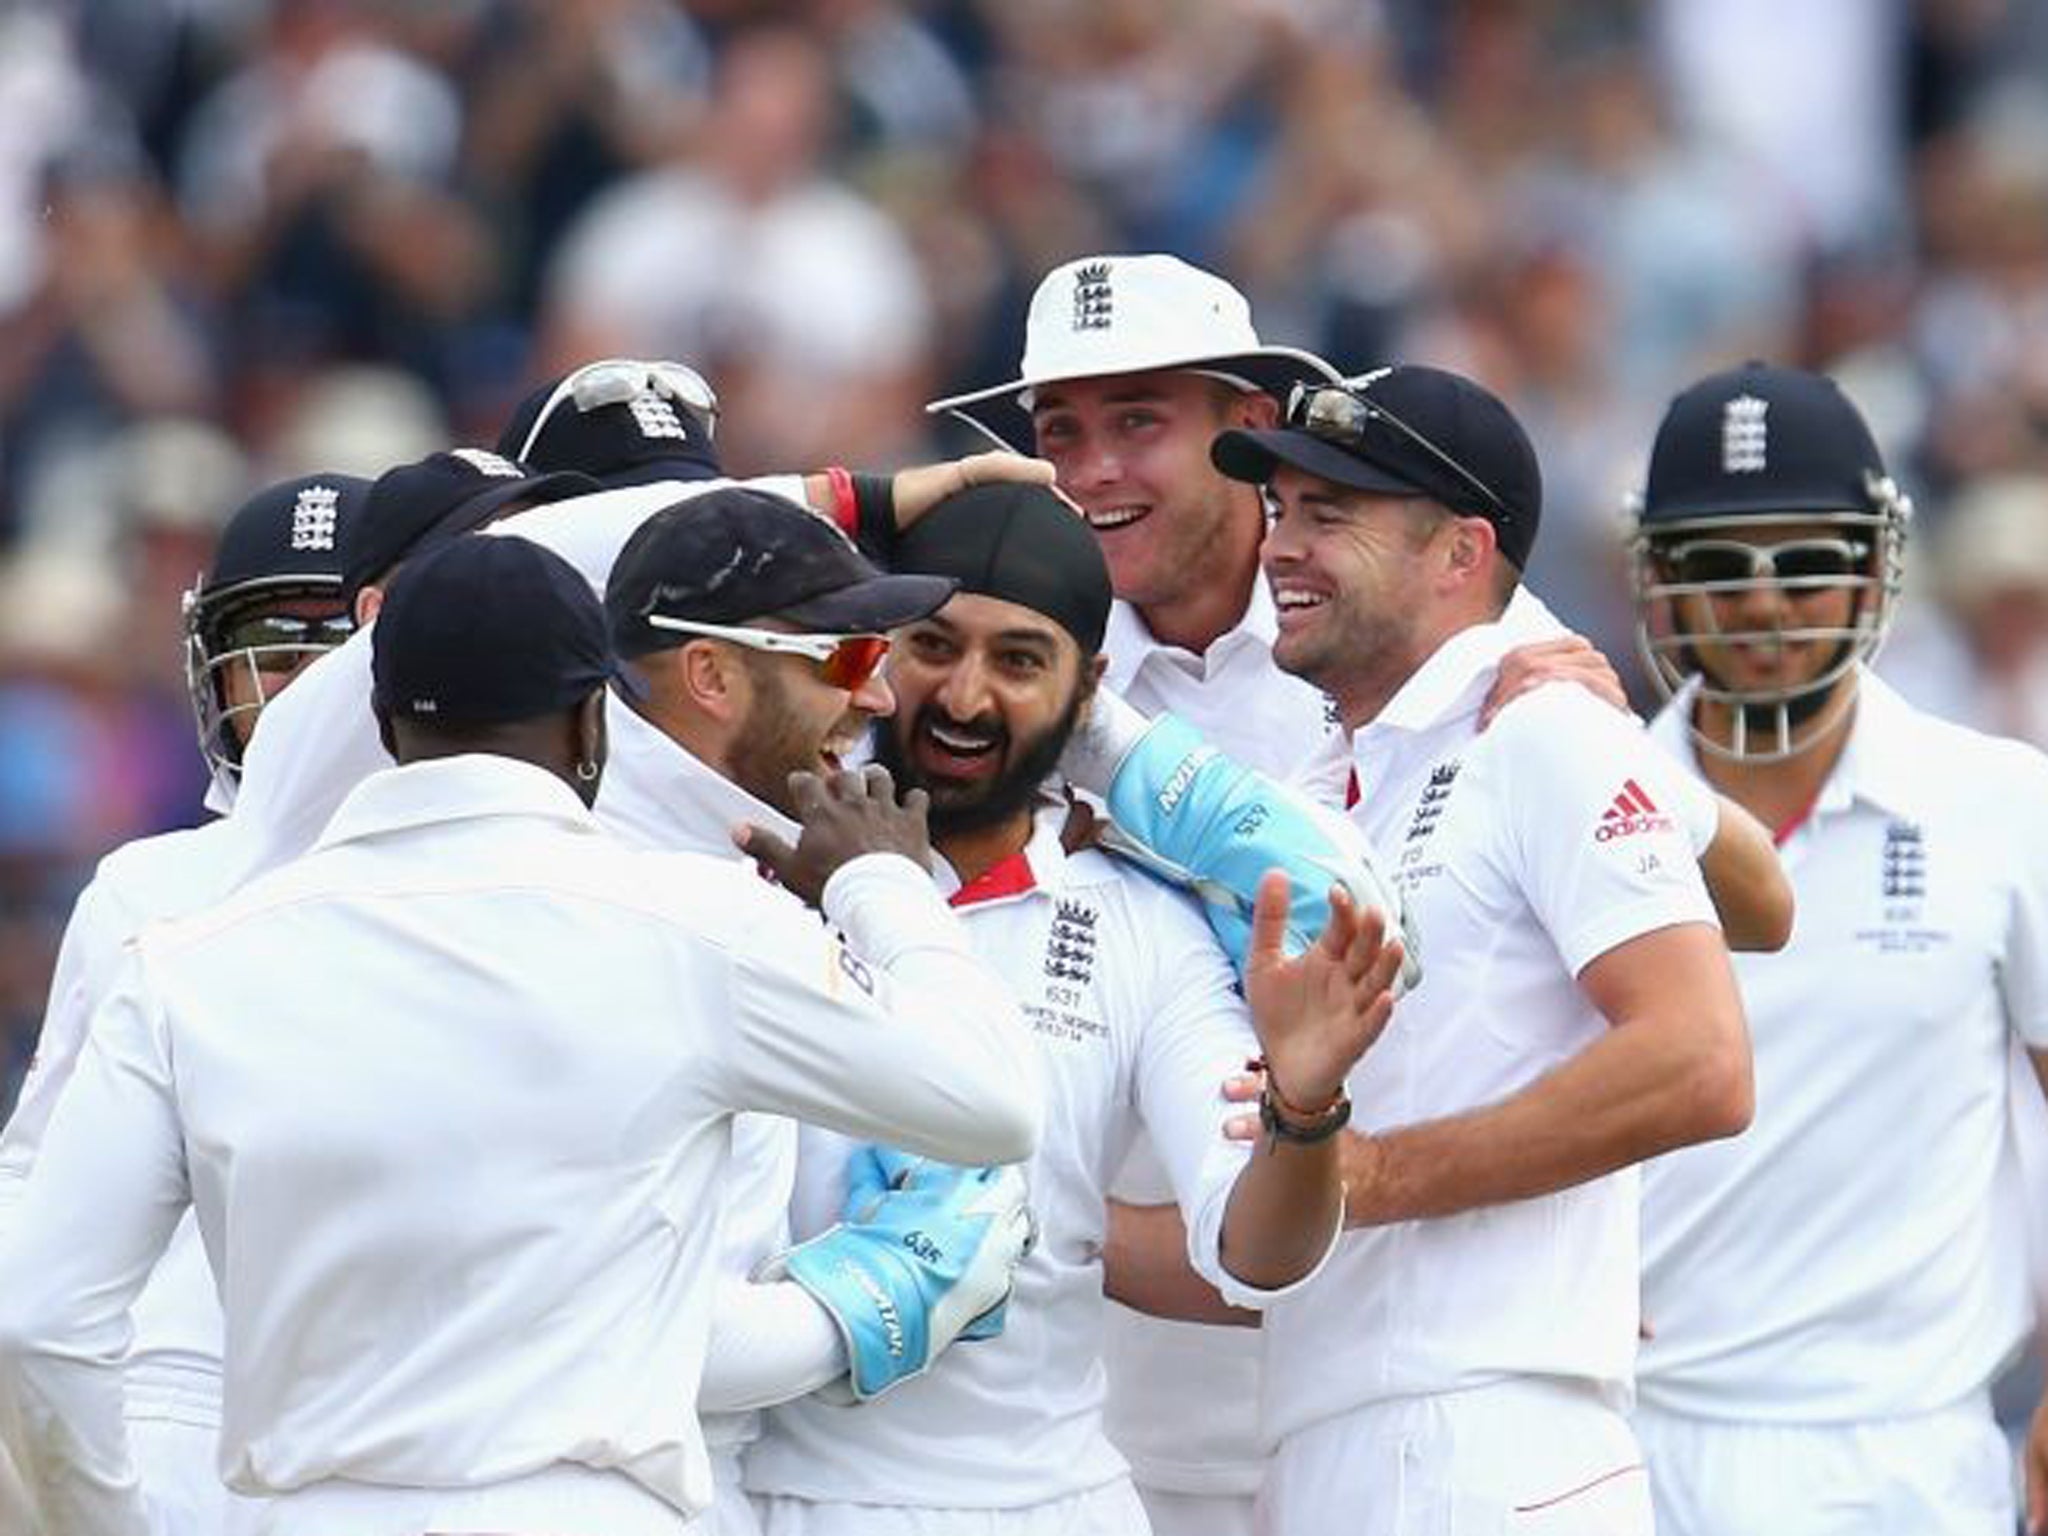 Monty Panesar celebrates after taking the wicket of Steve Smith